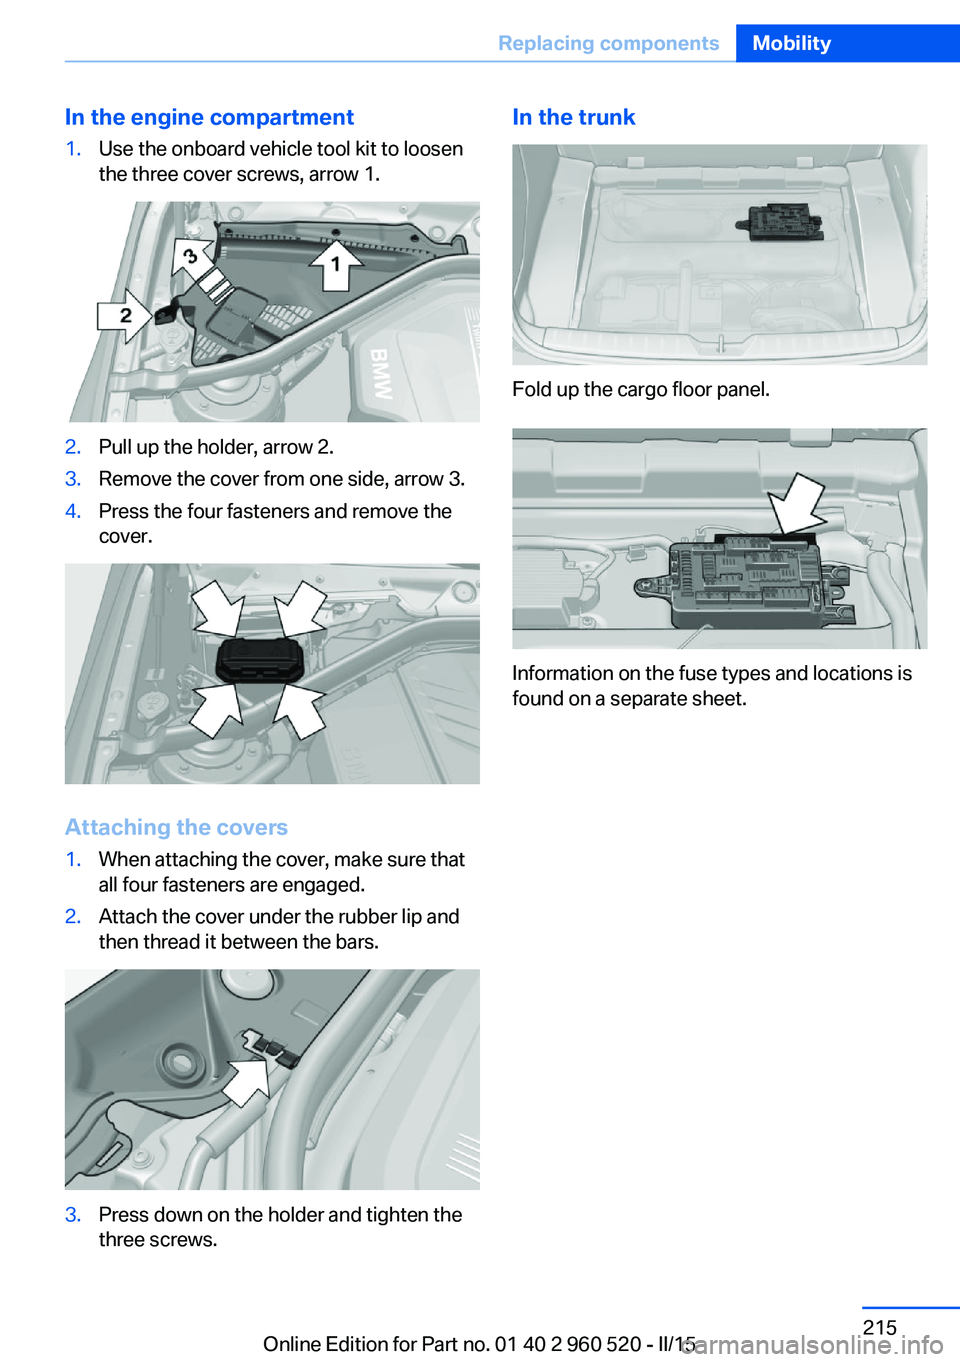 BMW 428 COUPE 2015  Owners Manual In the engine compartment1.Use the onboard vehicle tool kit to loosen
the three cover screws, arrow 1.2.Pull up the holder, arrow 2.3.Remove the cover from one side, arrow 3.4.Press the four fasteners